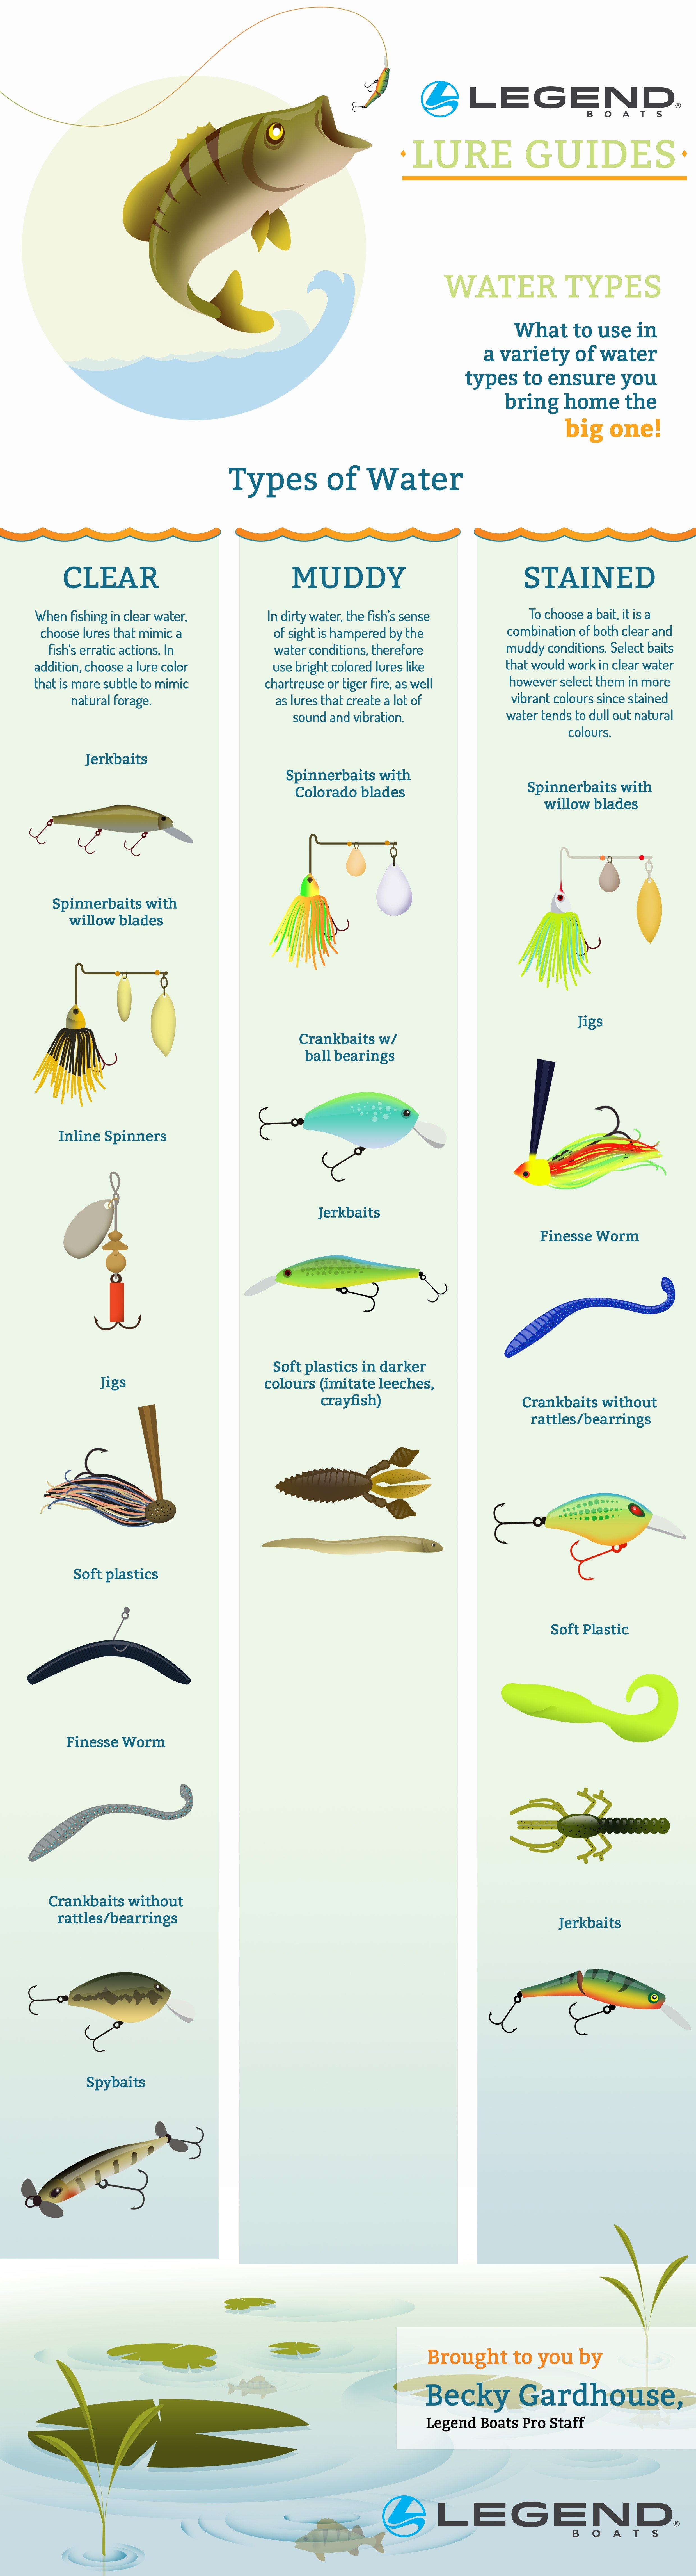 Top lures to pack for those fishing trips., Blog